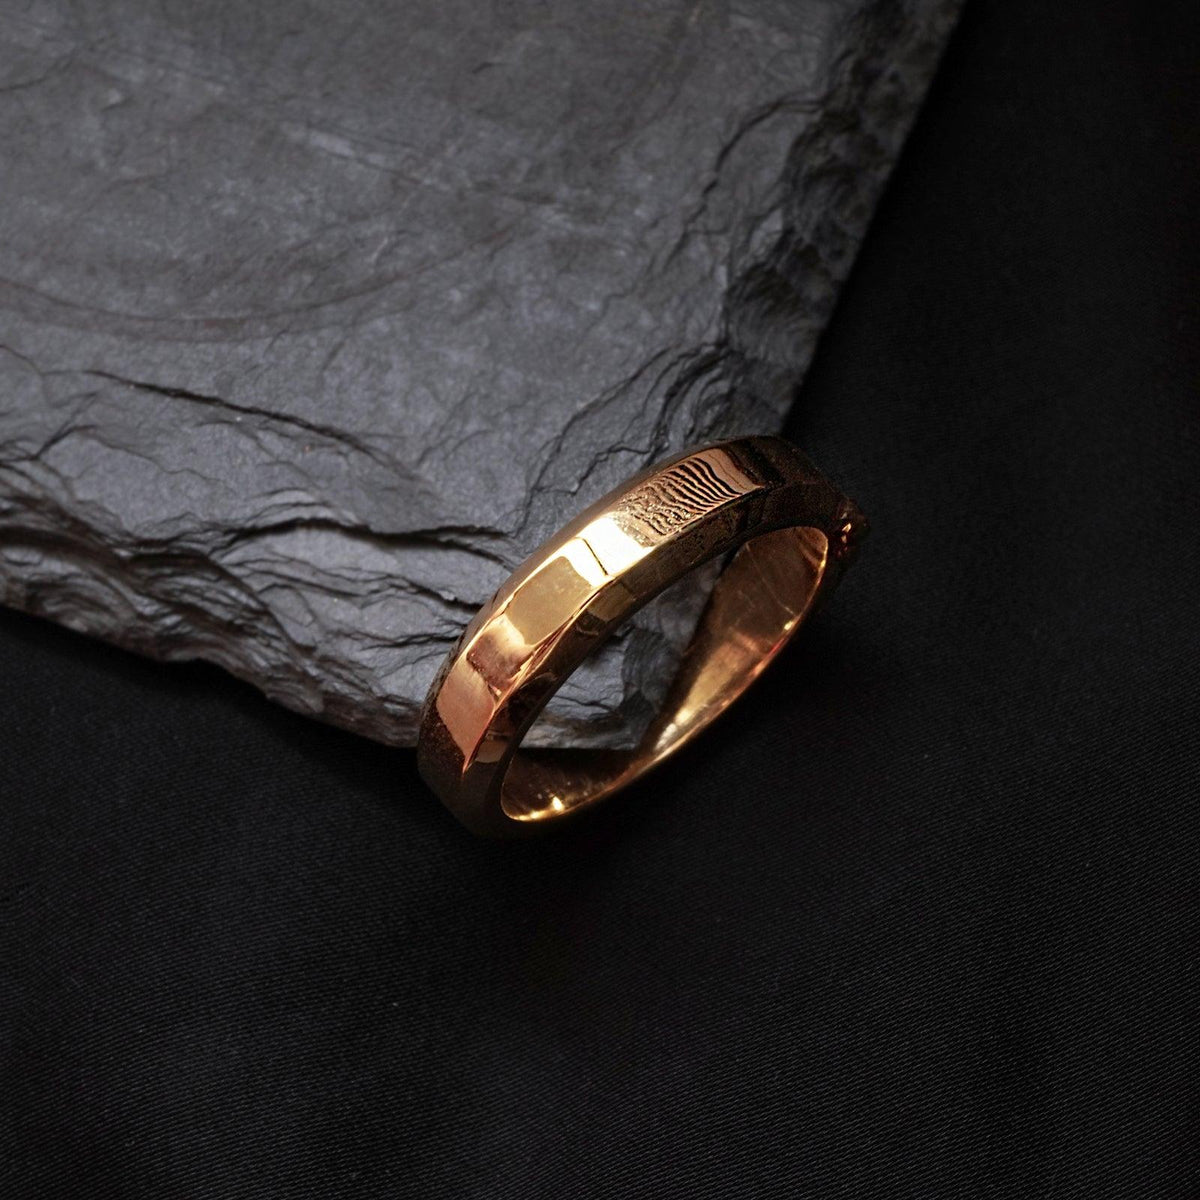 Chevron Beveled Ring Band in 14K Gold, 5mm